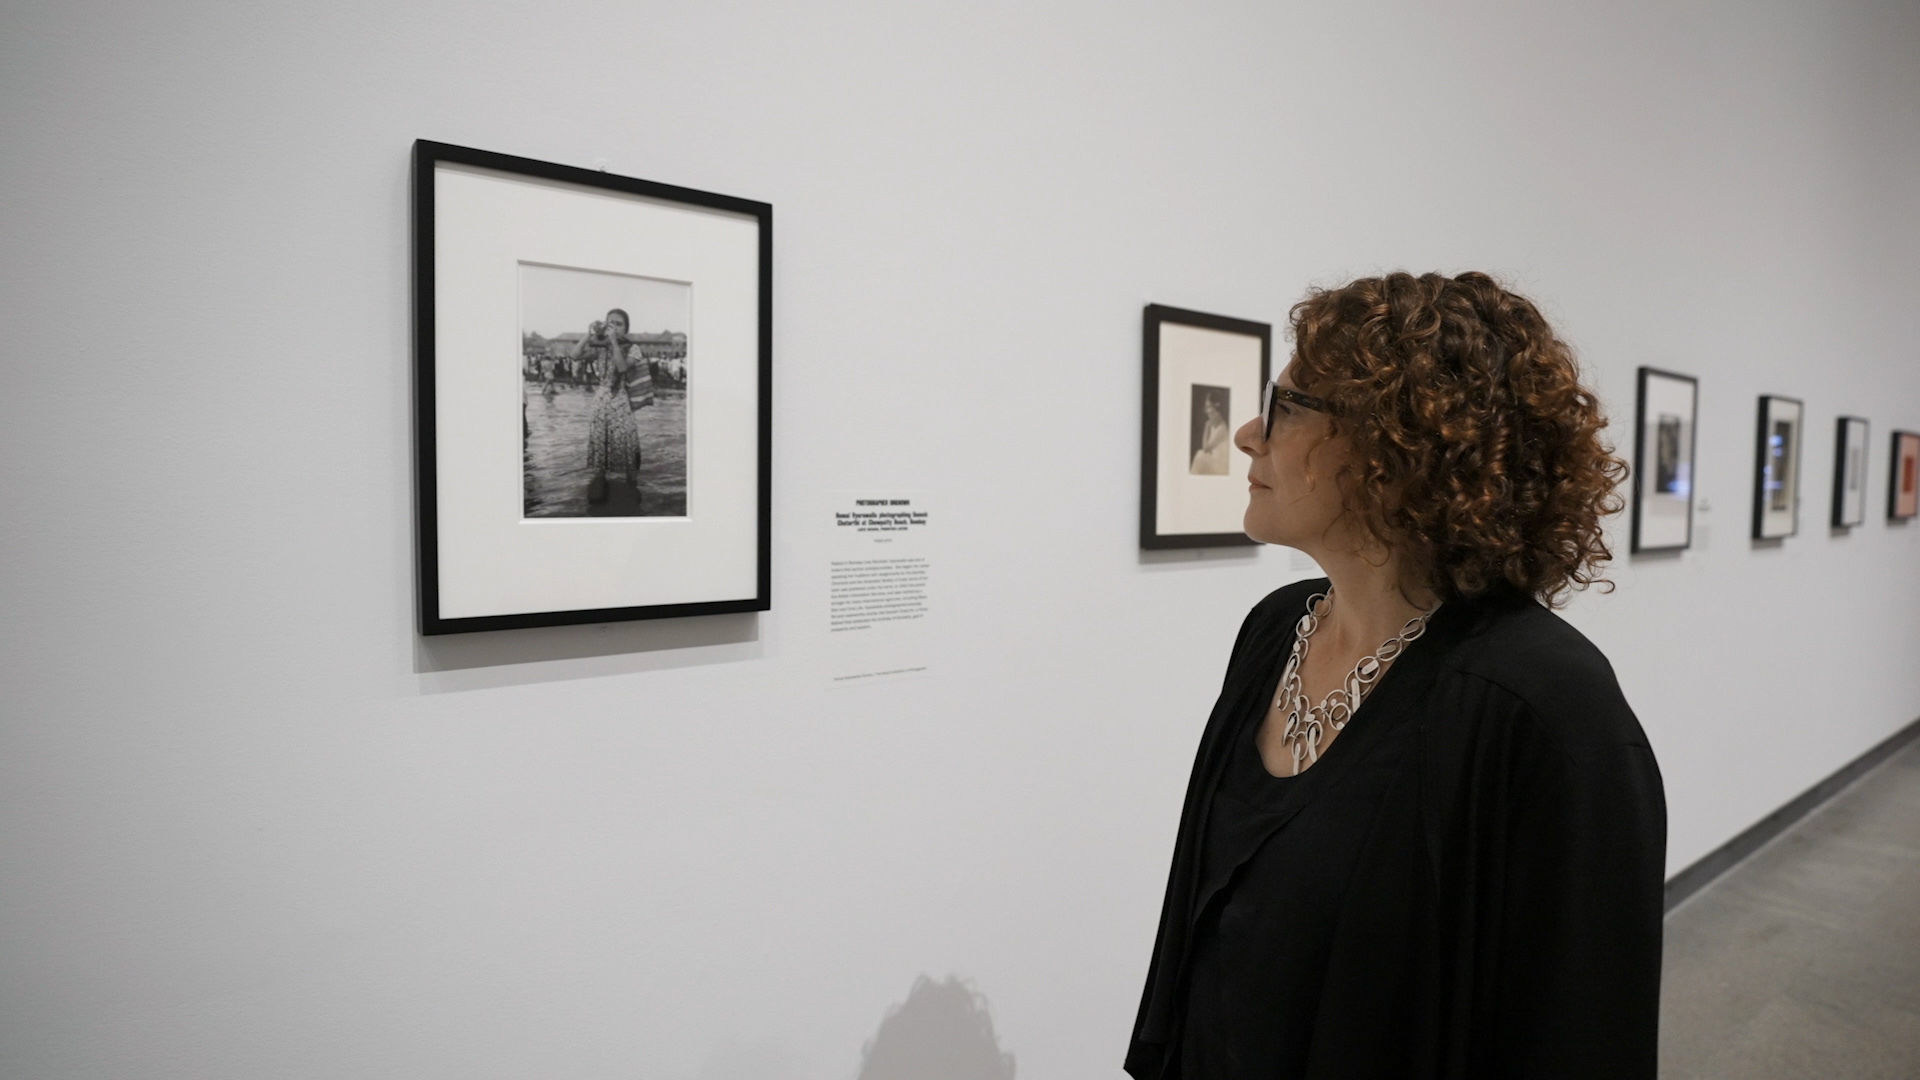 A woman looks at photographs hung in a gallery